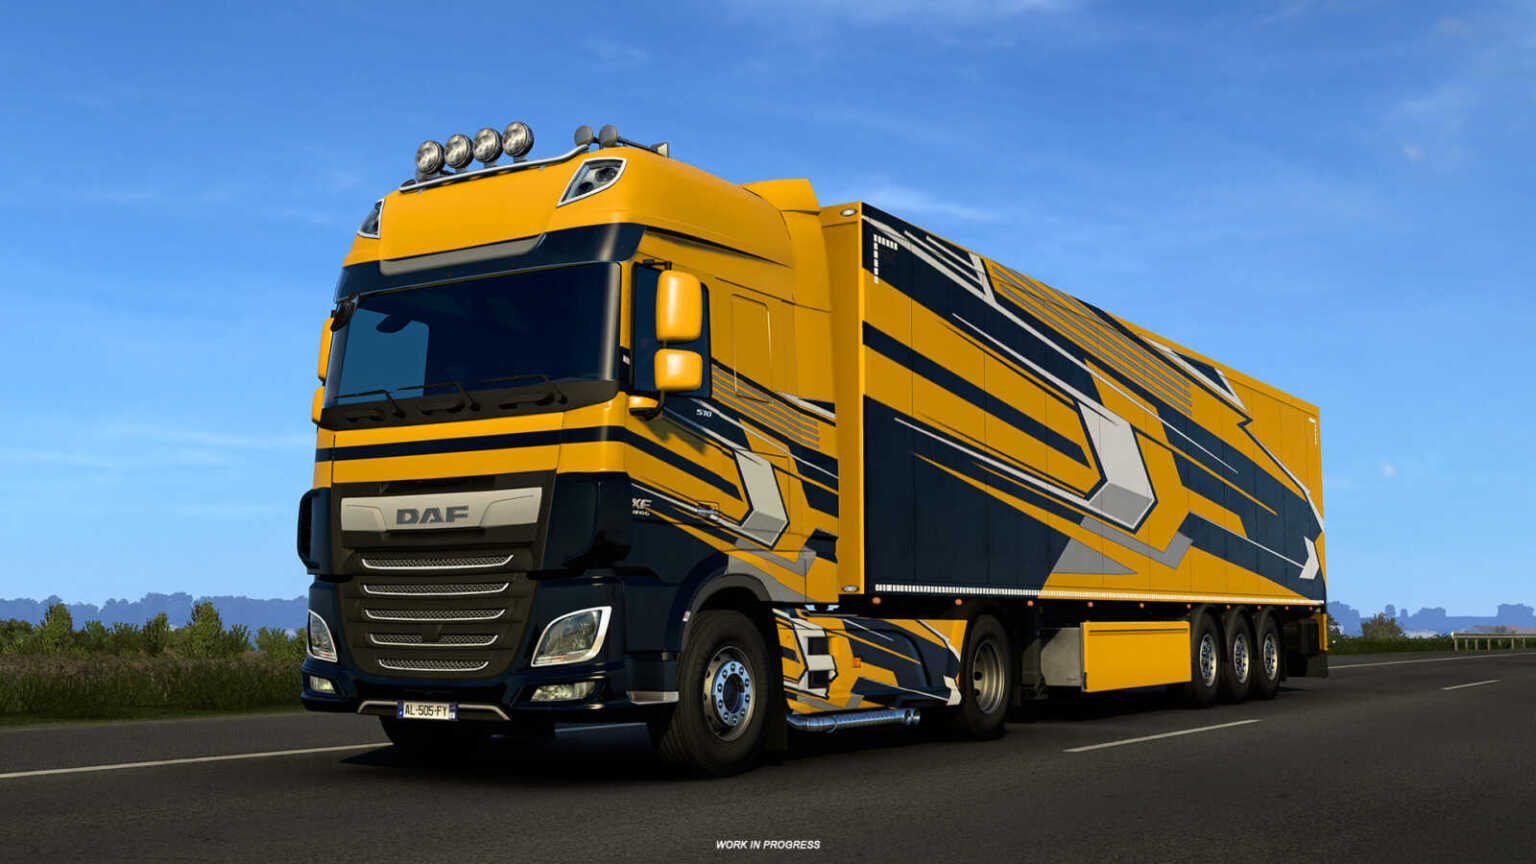 A little more of France in Euro Truck Simulator 1.40 beta 2